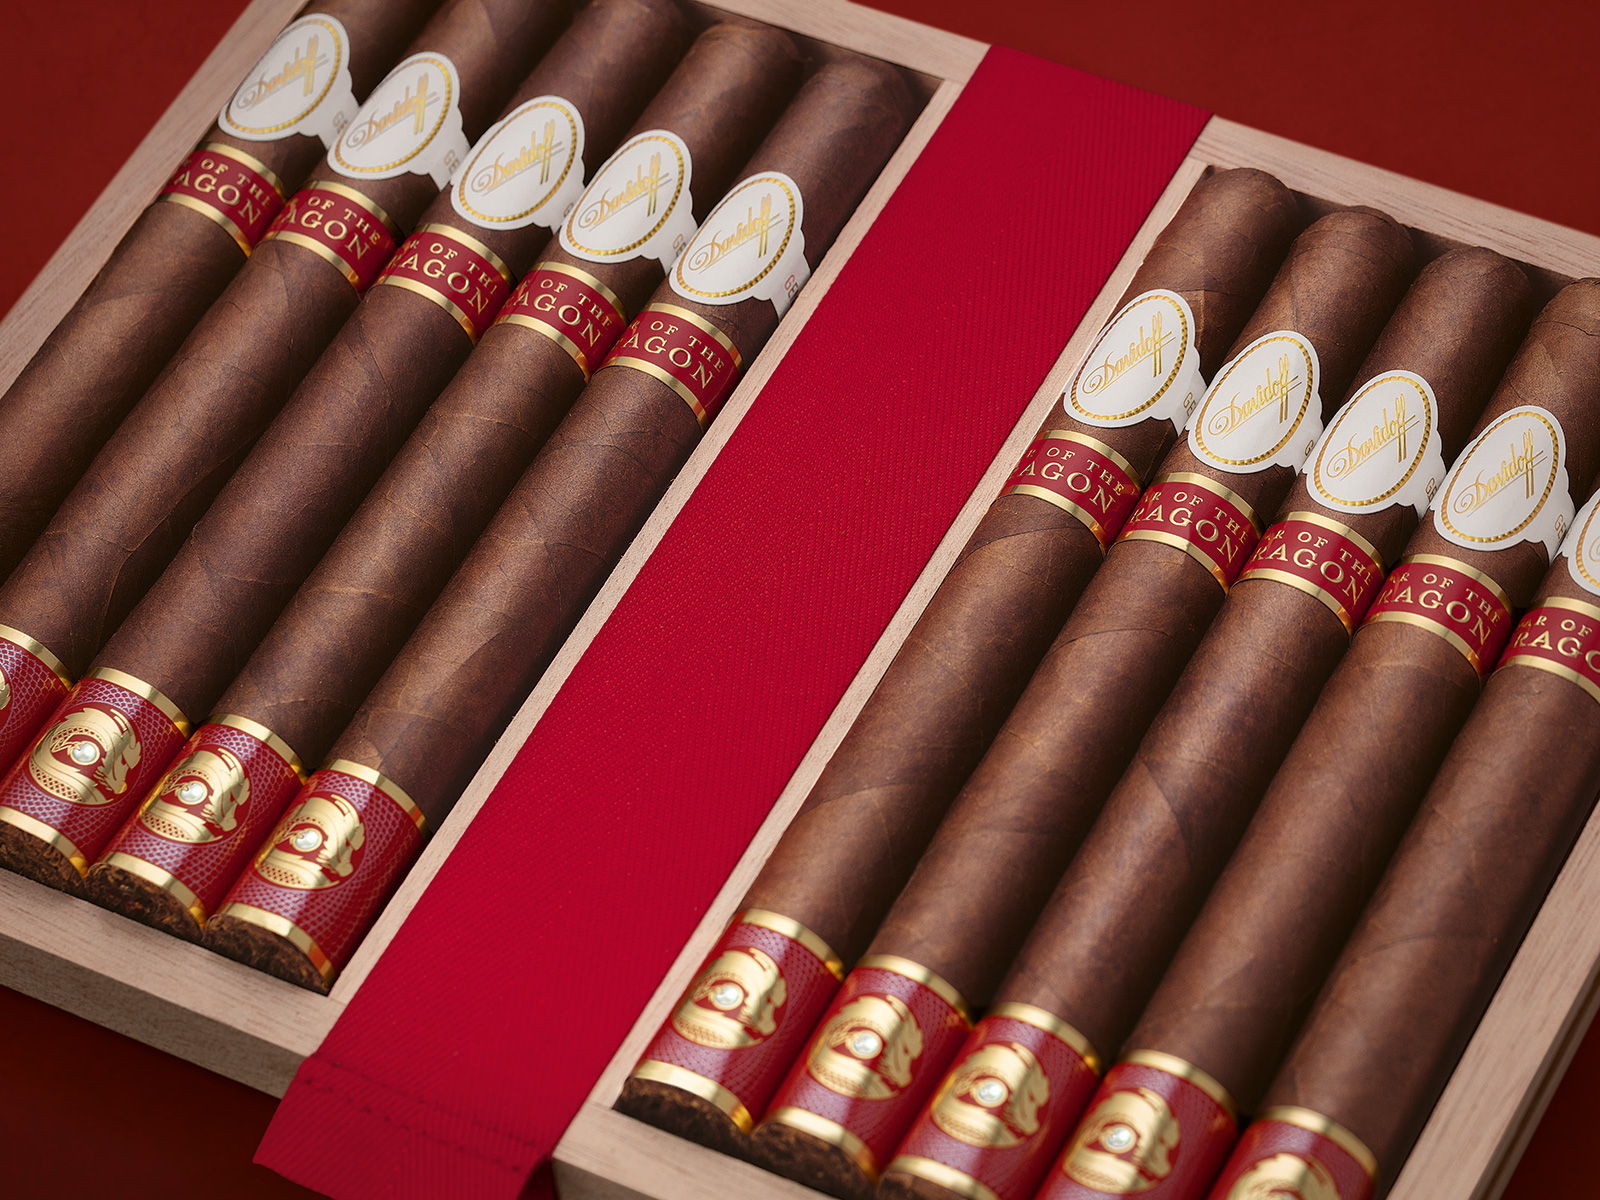 10 Davidoff Year of the Dragon Limited Edition double corona cigars in their opened box.